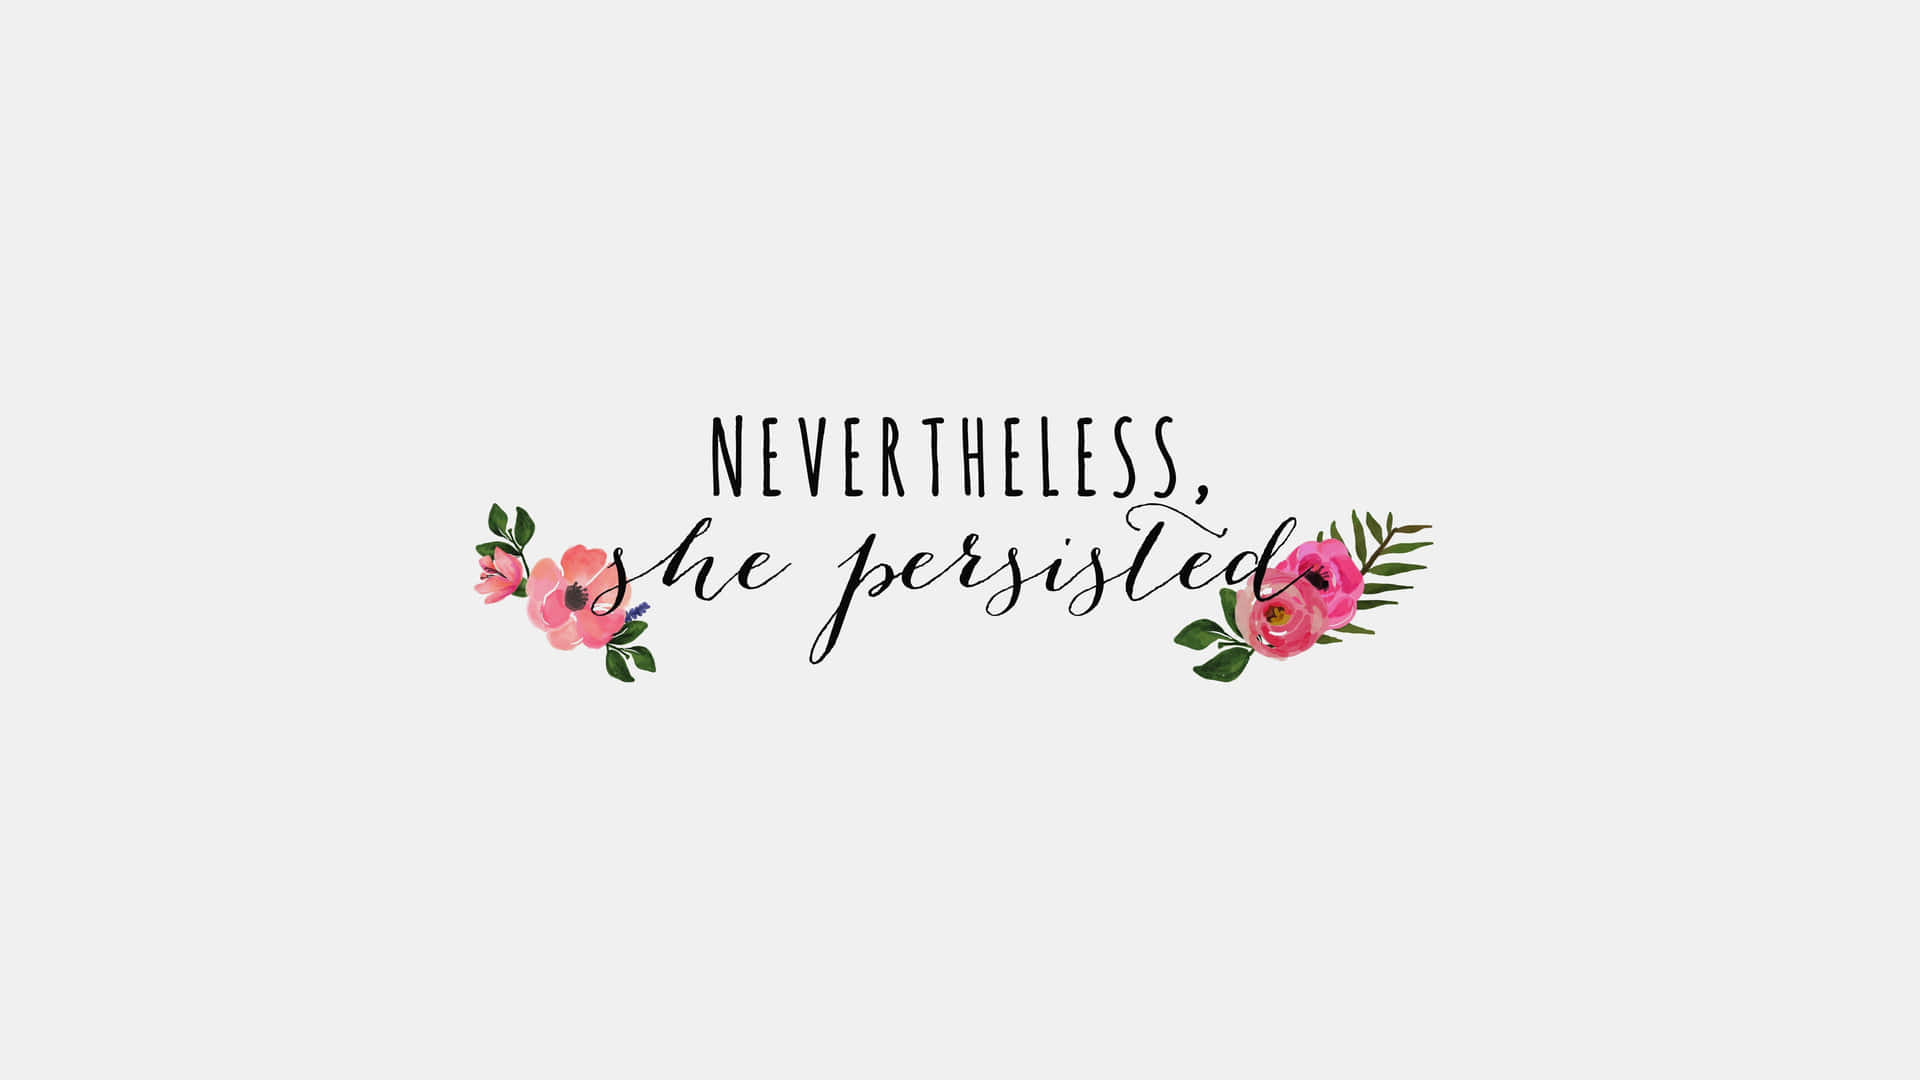 Neverless The Persecuted, Floral, Quote, Quote, Quote, Quote, Quote, Quote, Quote, Quote, Quote, Quote, Quote Wallpaper